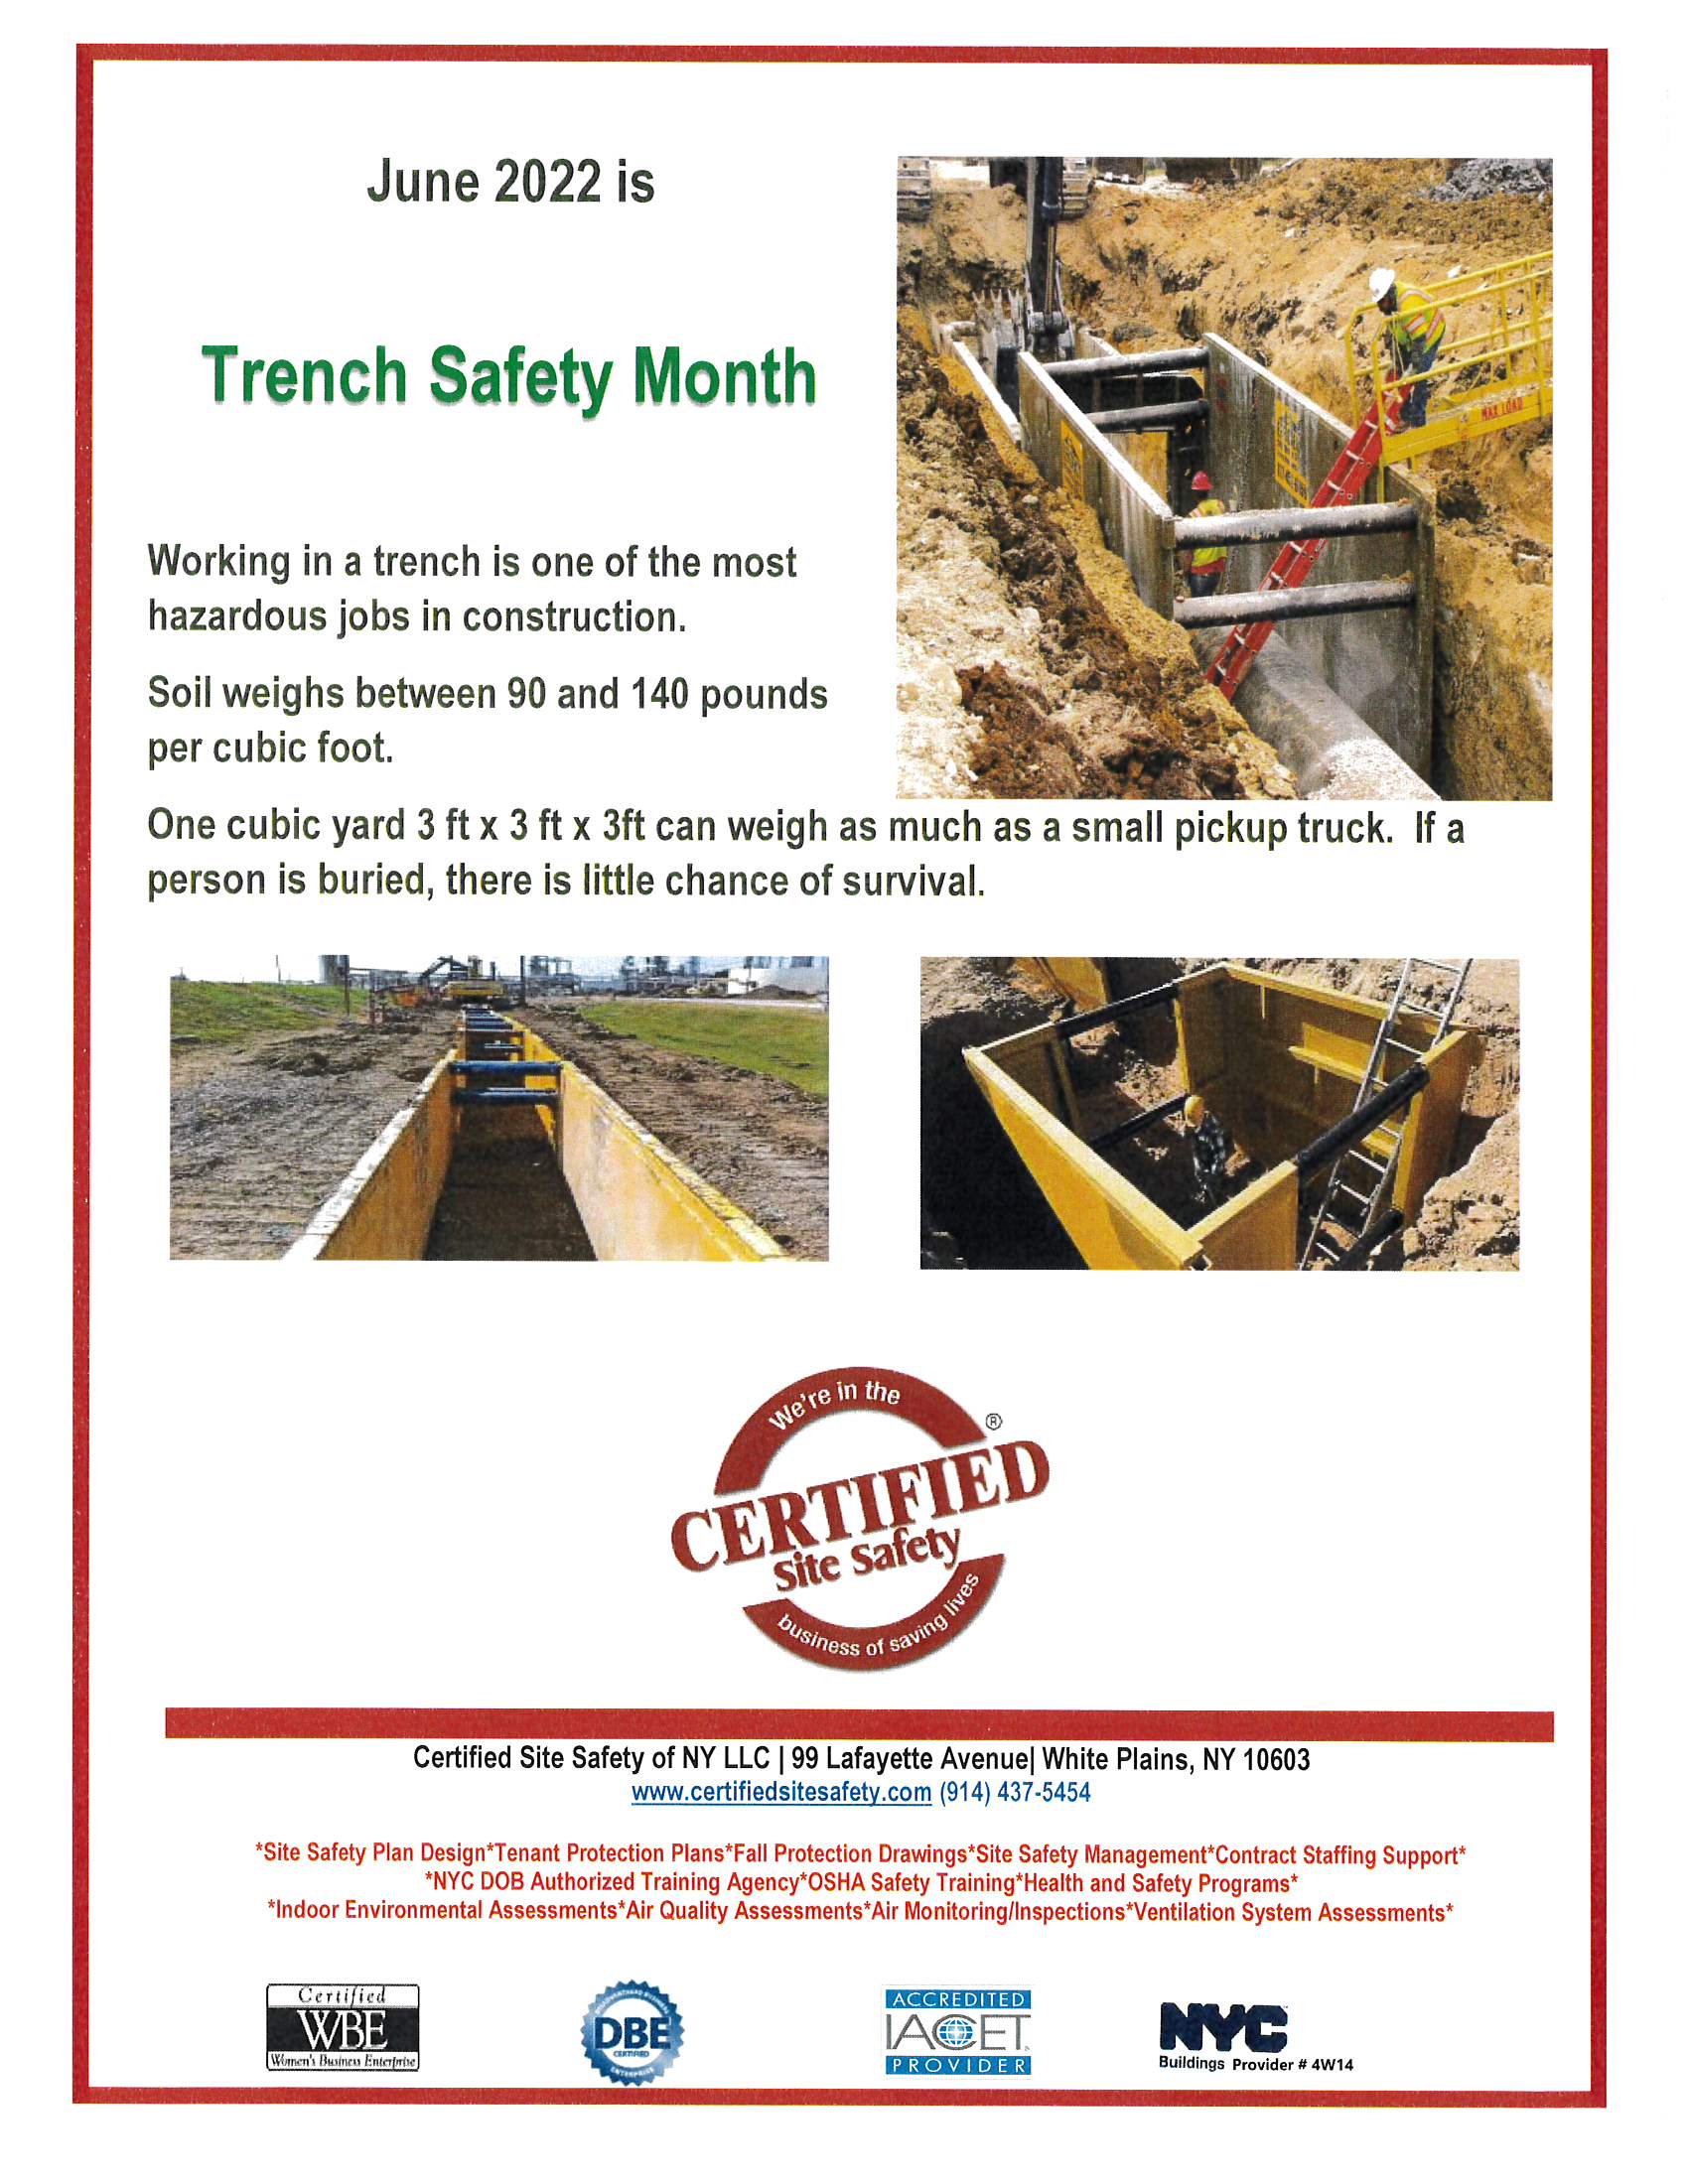 Trench Safety